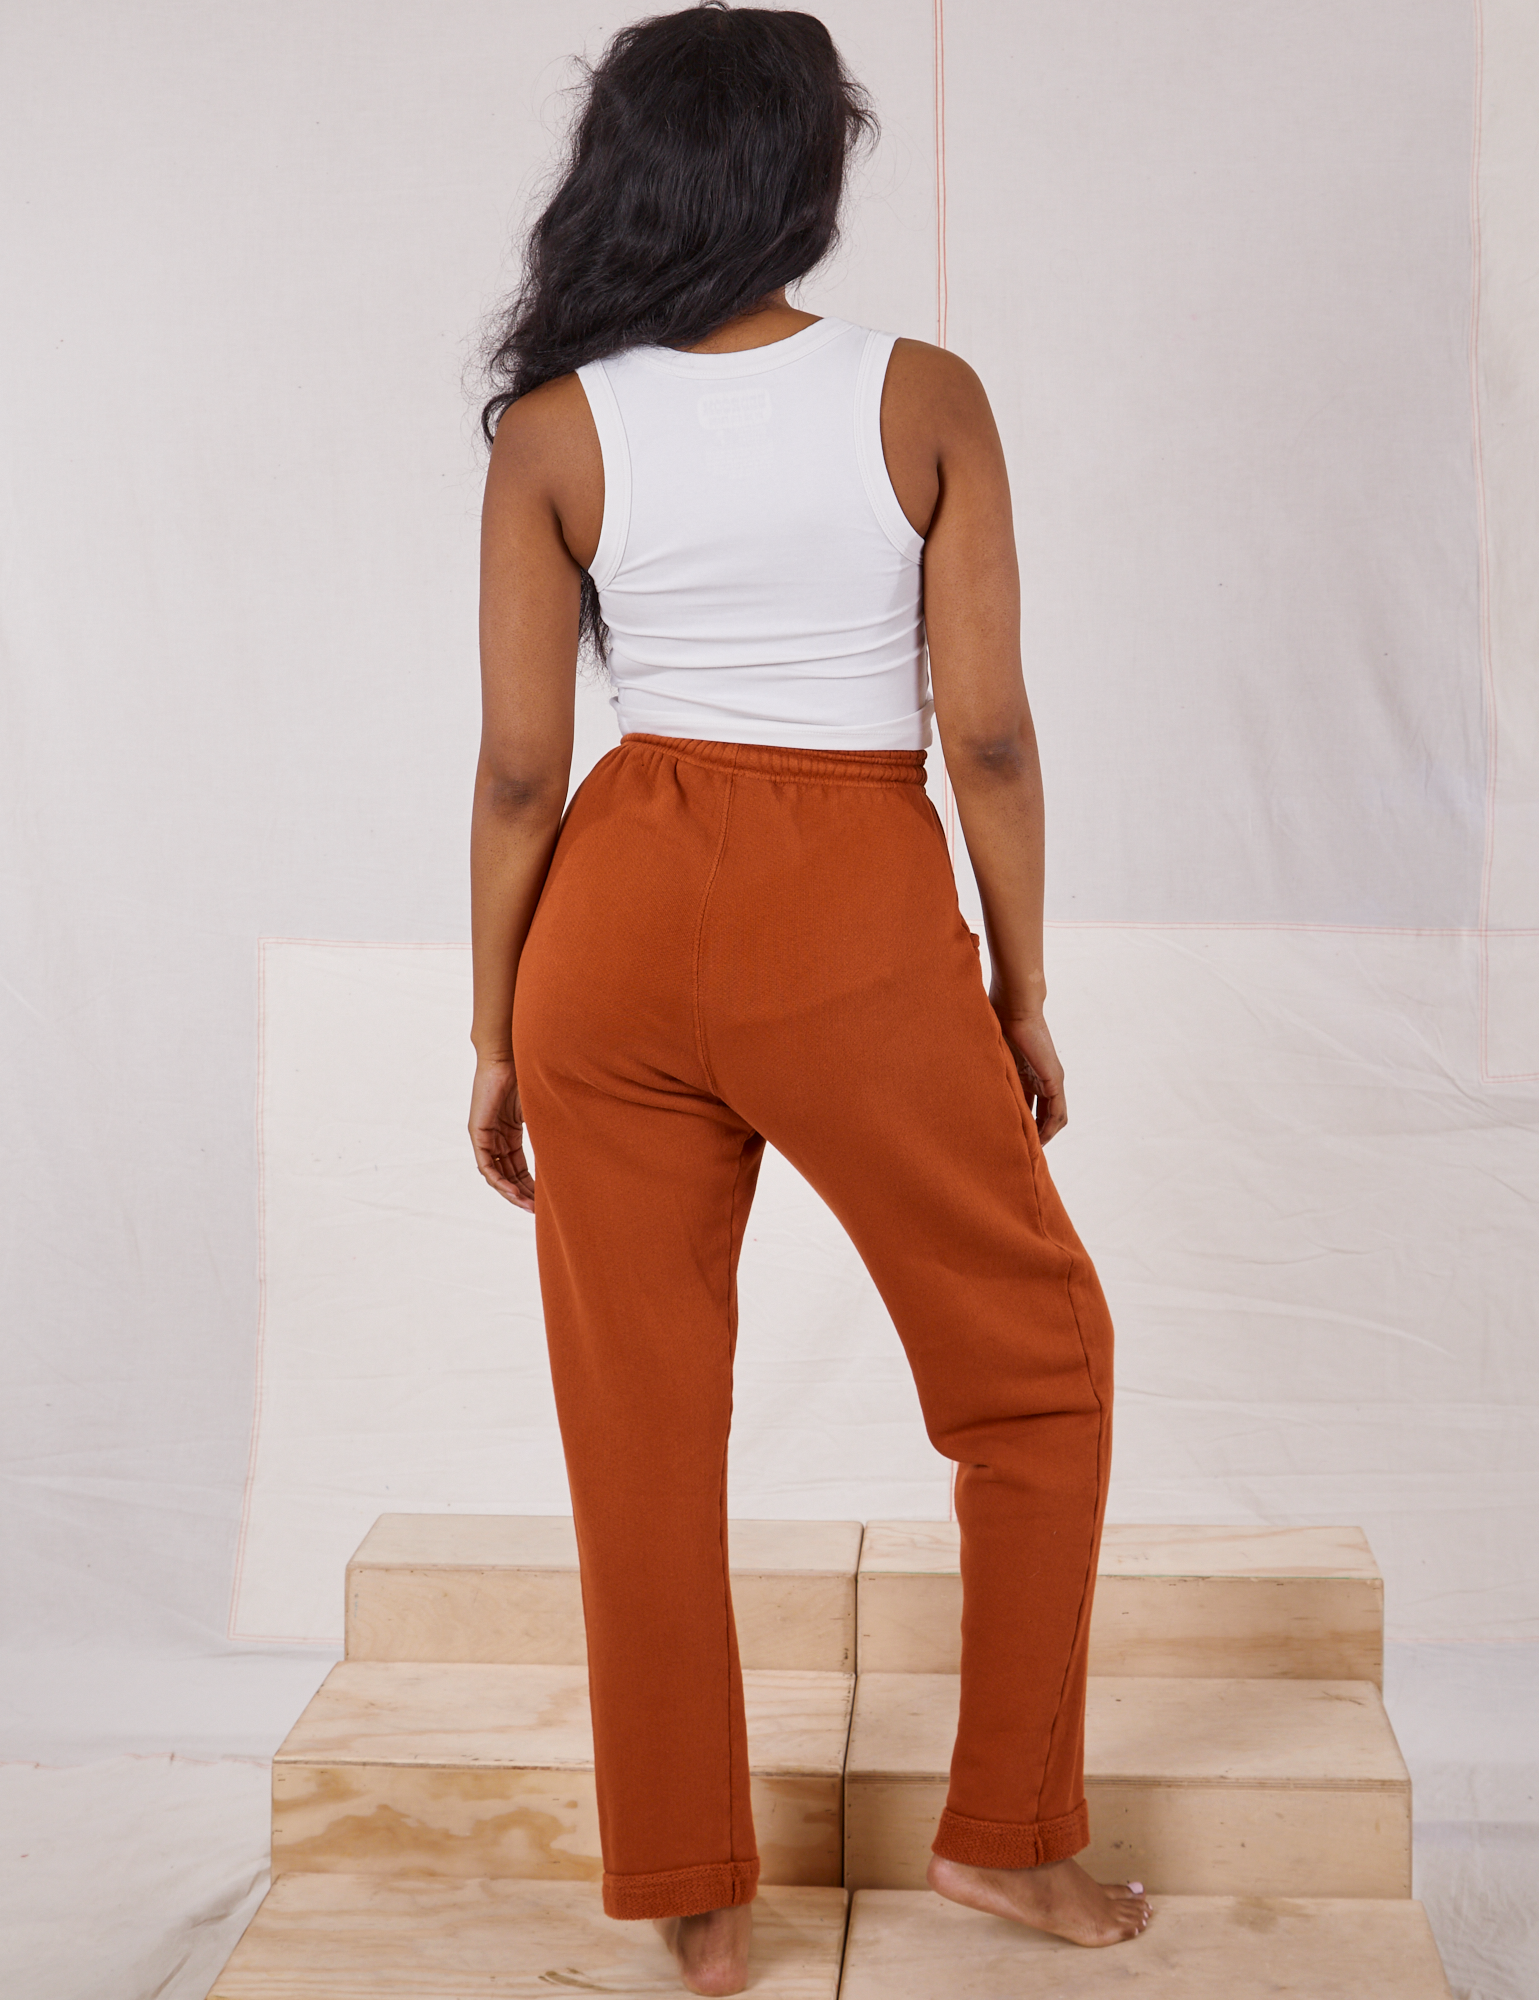 Back view of Rolled Cuff Sweat Pants in Burnt Terracotta and vintage off-white Cropped Tank on Kandia